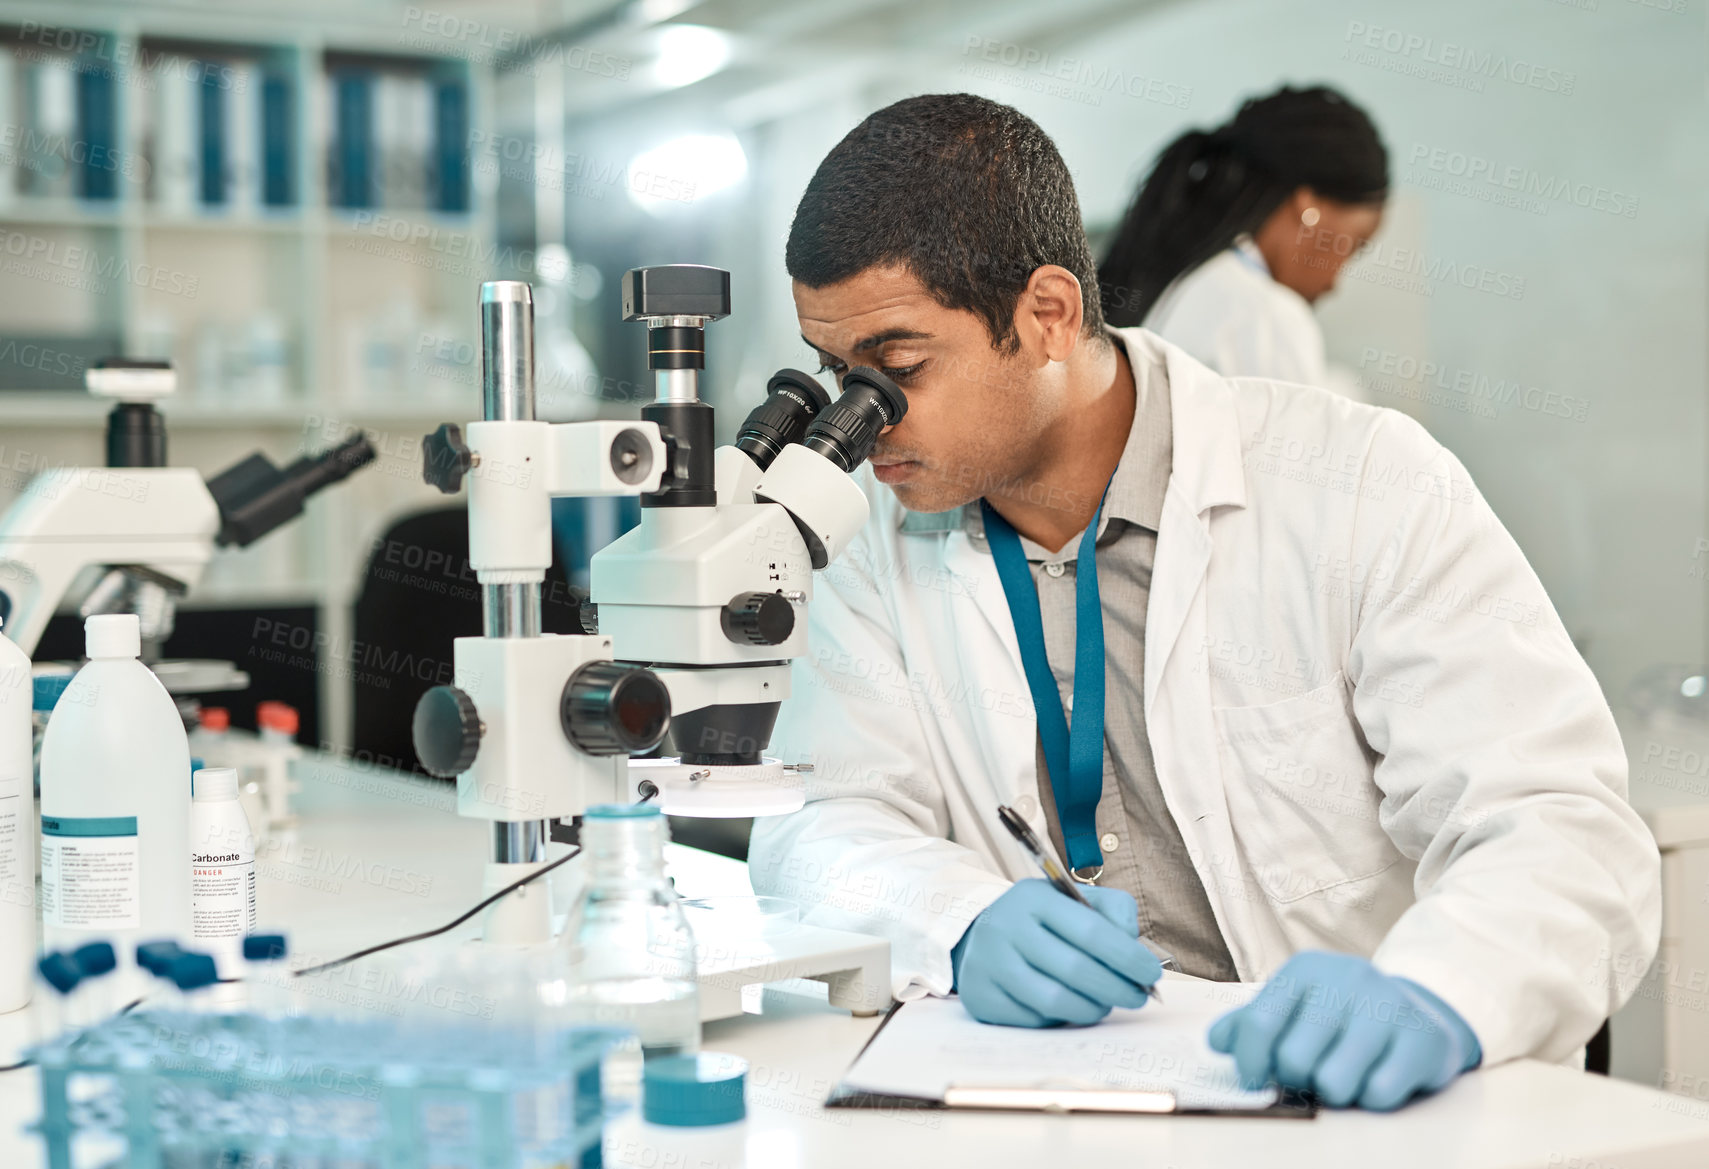 Buy stock photo Shot of a young scientist writing notes while using a microscope in a lab